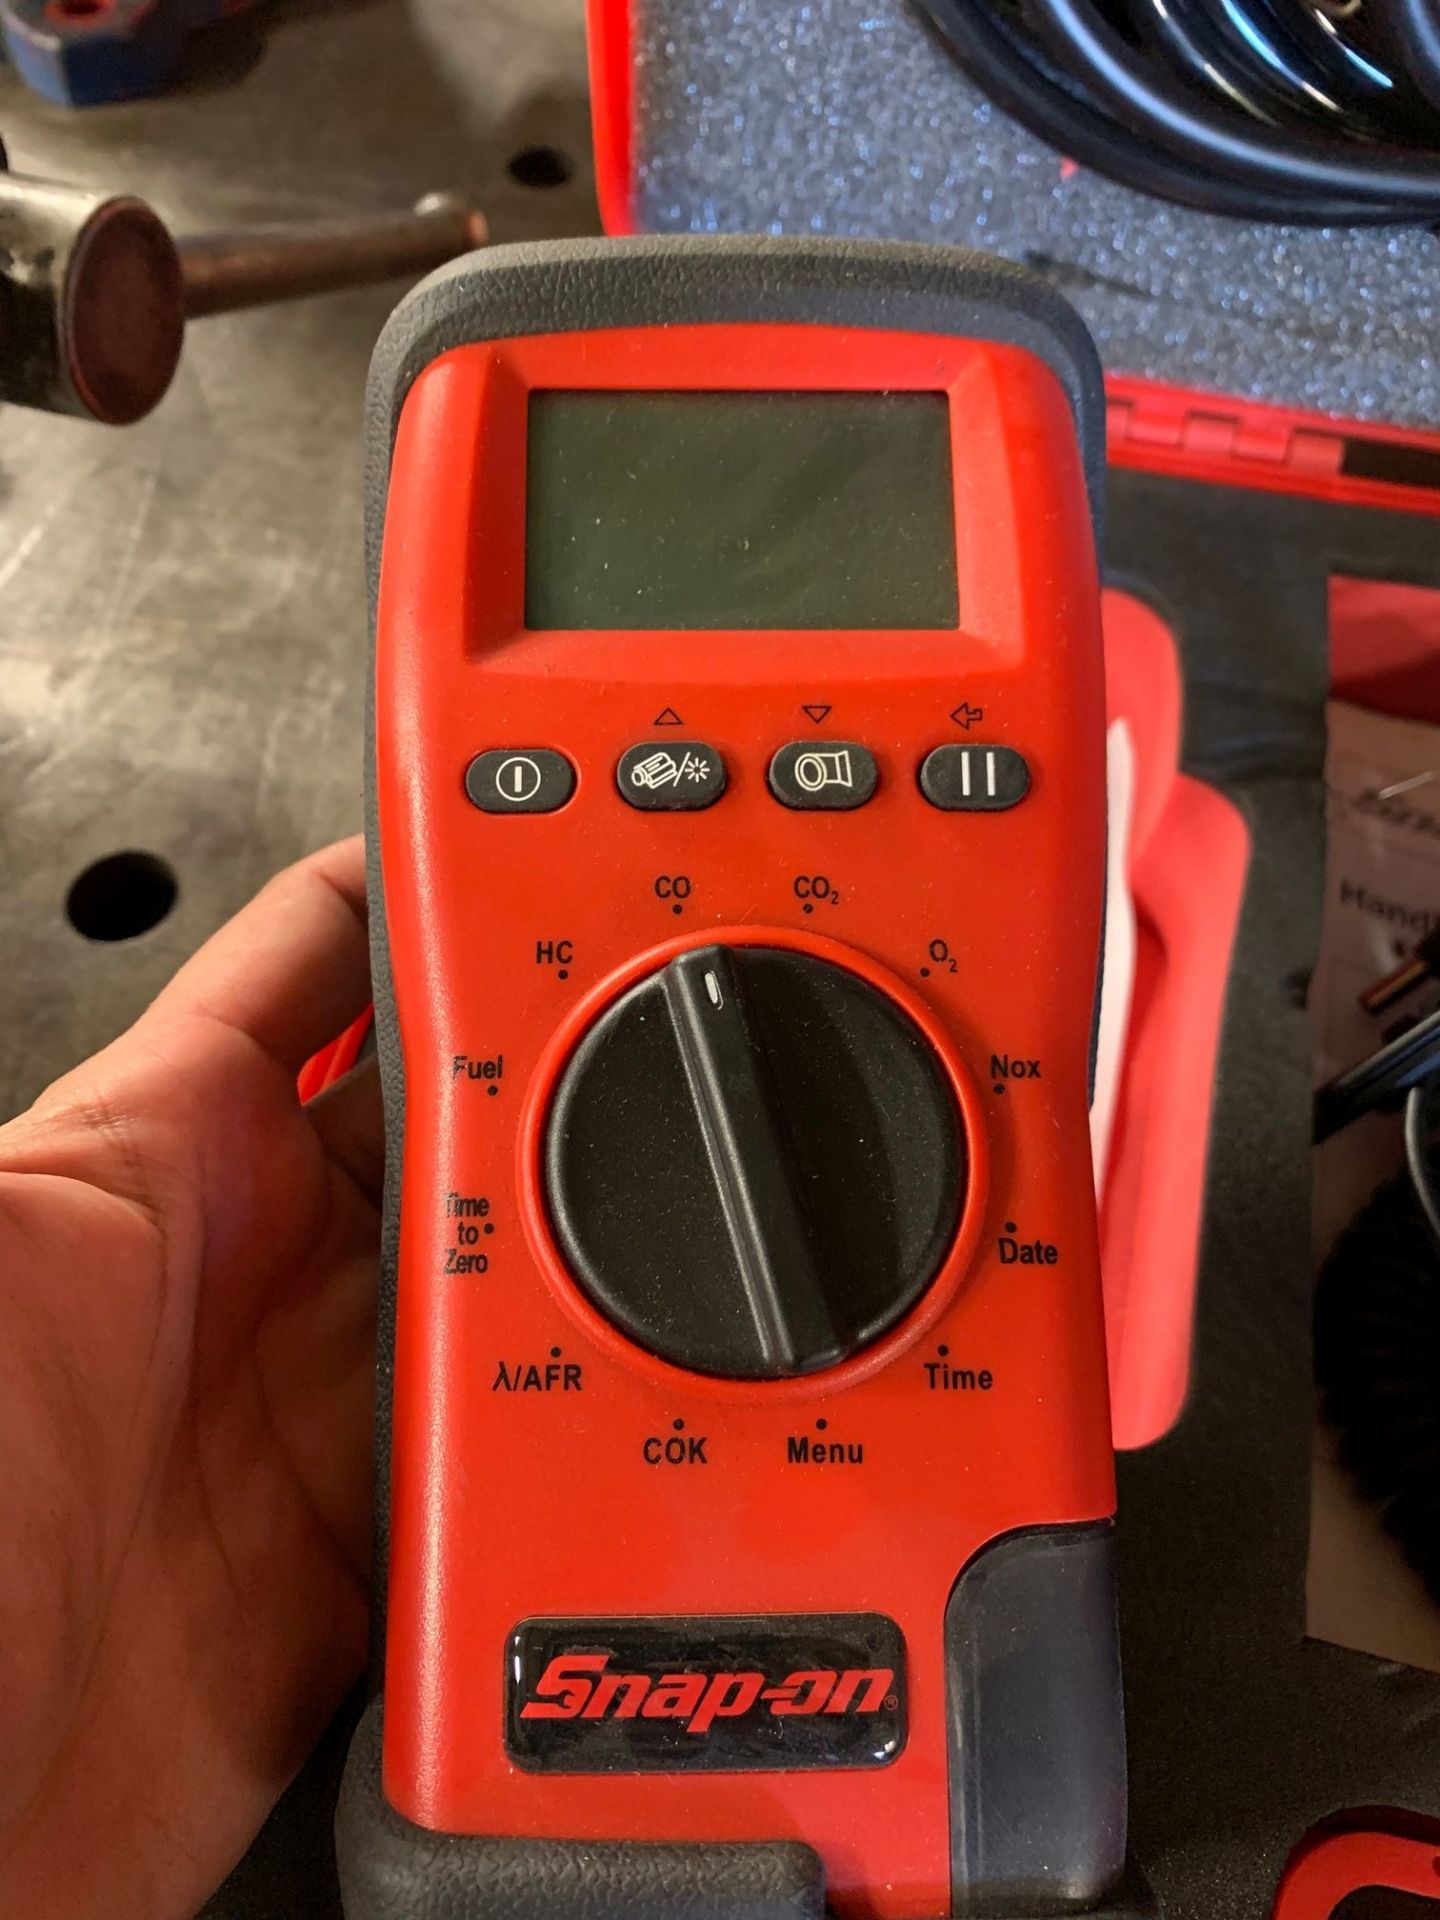 SNAP ON HAND HELD GAS ANALYZER - Image 3 of 3